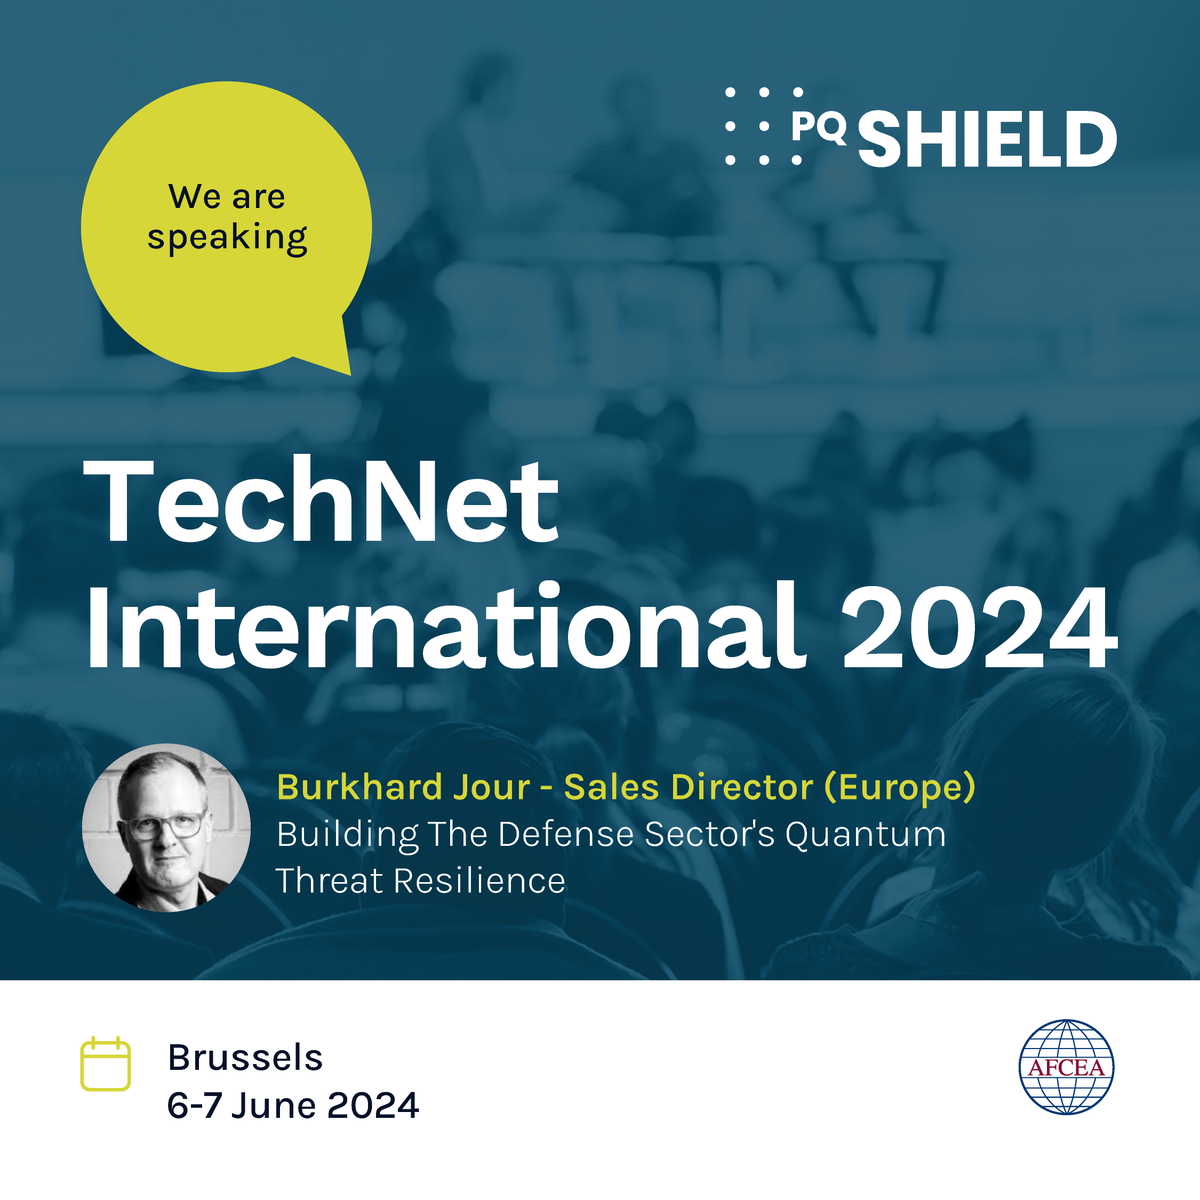 Our Sales Director Europe Burkhard Jour will be speaking at TechNet International , Brussels 6-7th June - “Building the Defense Sector’s Quantum Threat Resilience'. We hope to see you in Brussels! #defense #security #quantumthreat #quantumcomputers #cybersecurity #cryptography